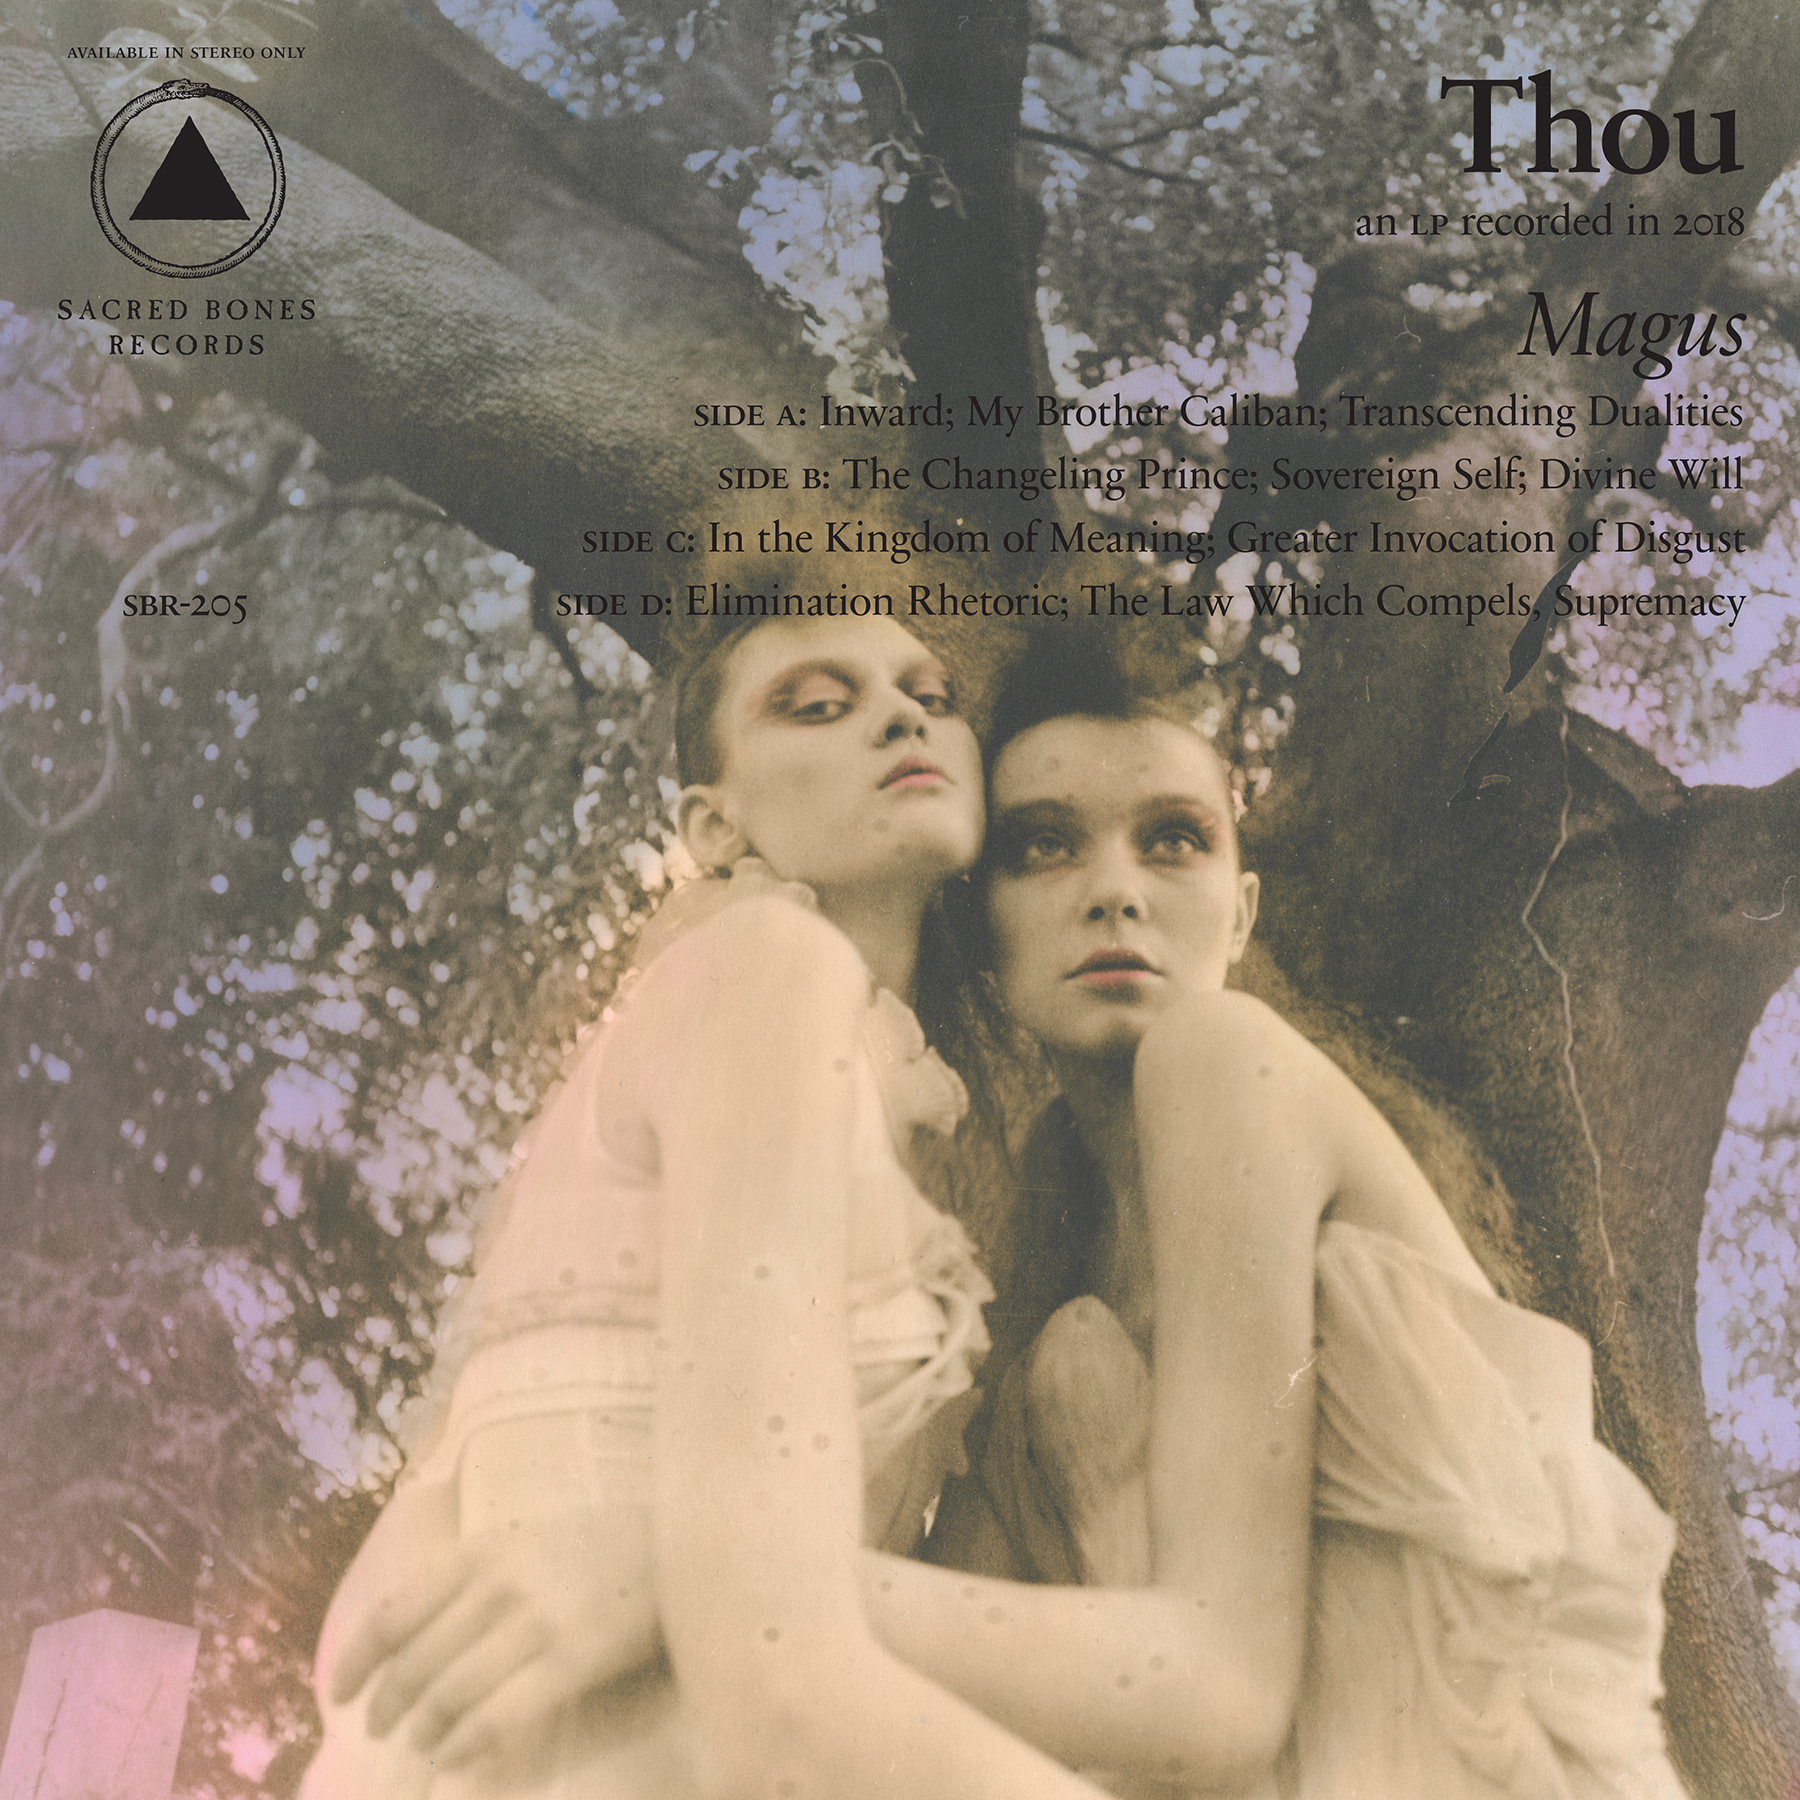 THOU - The Changeling Prince cover 